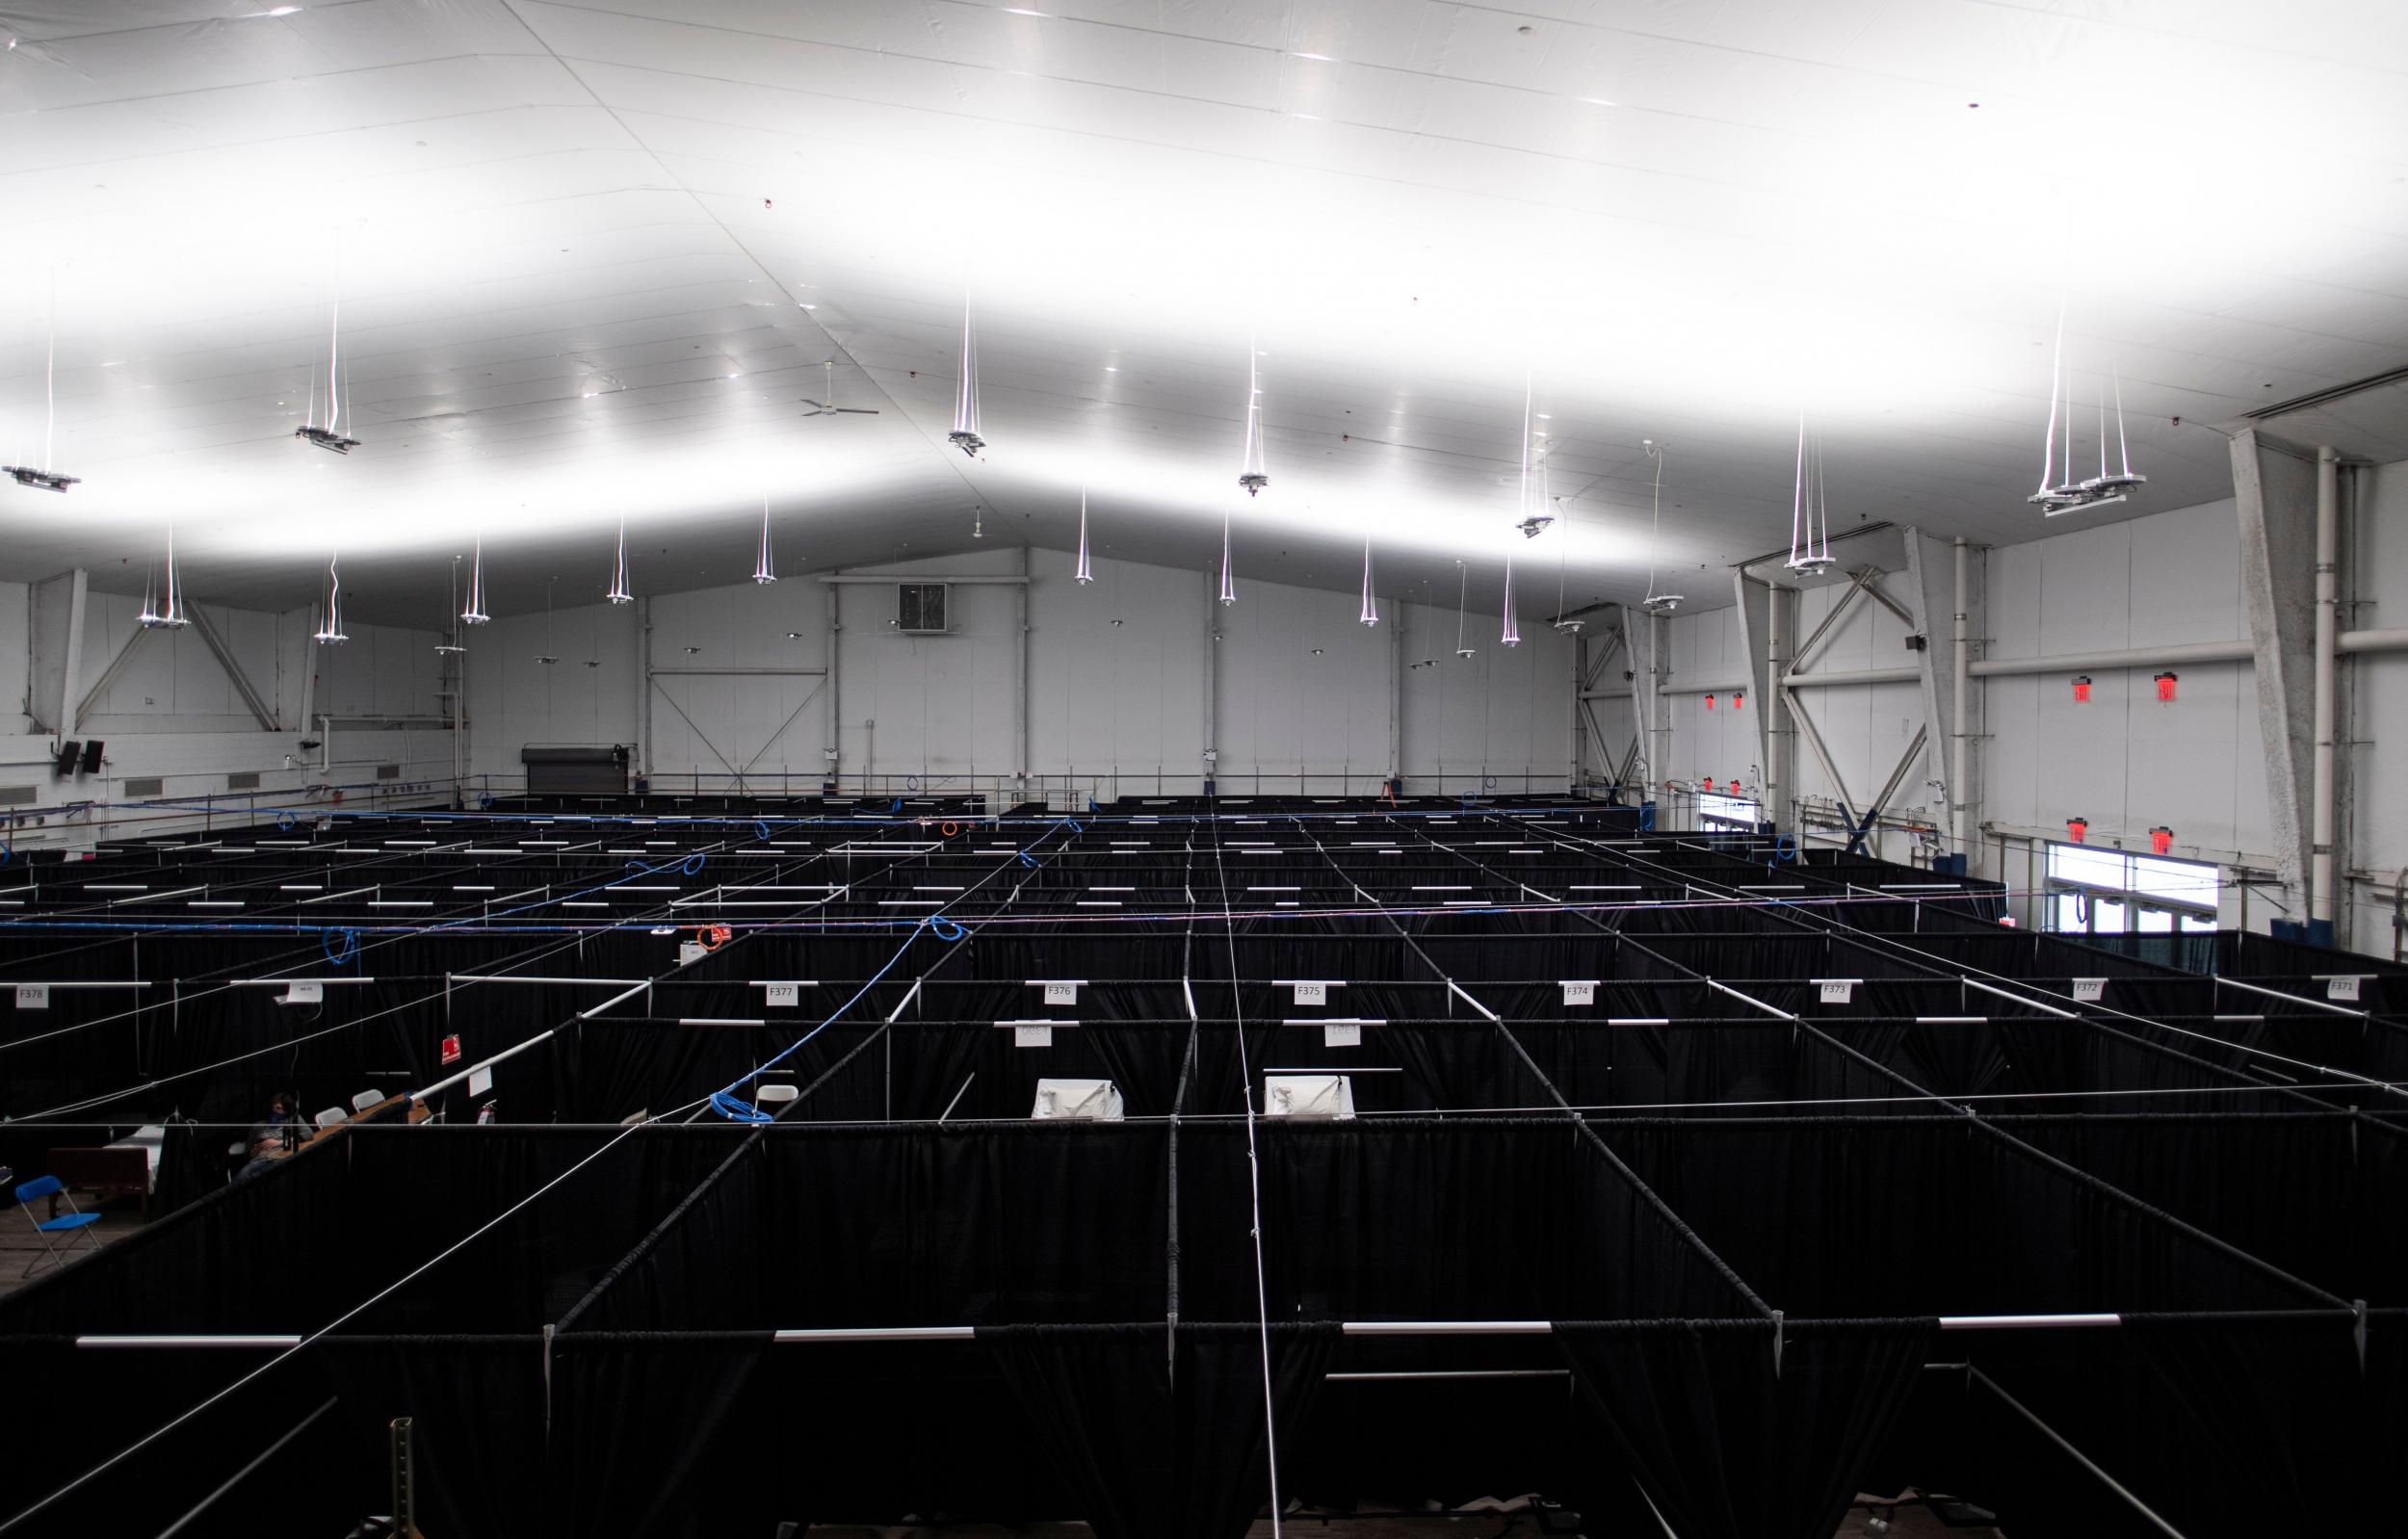 Beds are seen at the temporary hospital located at the USTA Billie Jean King National Tennis Center in Queens